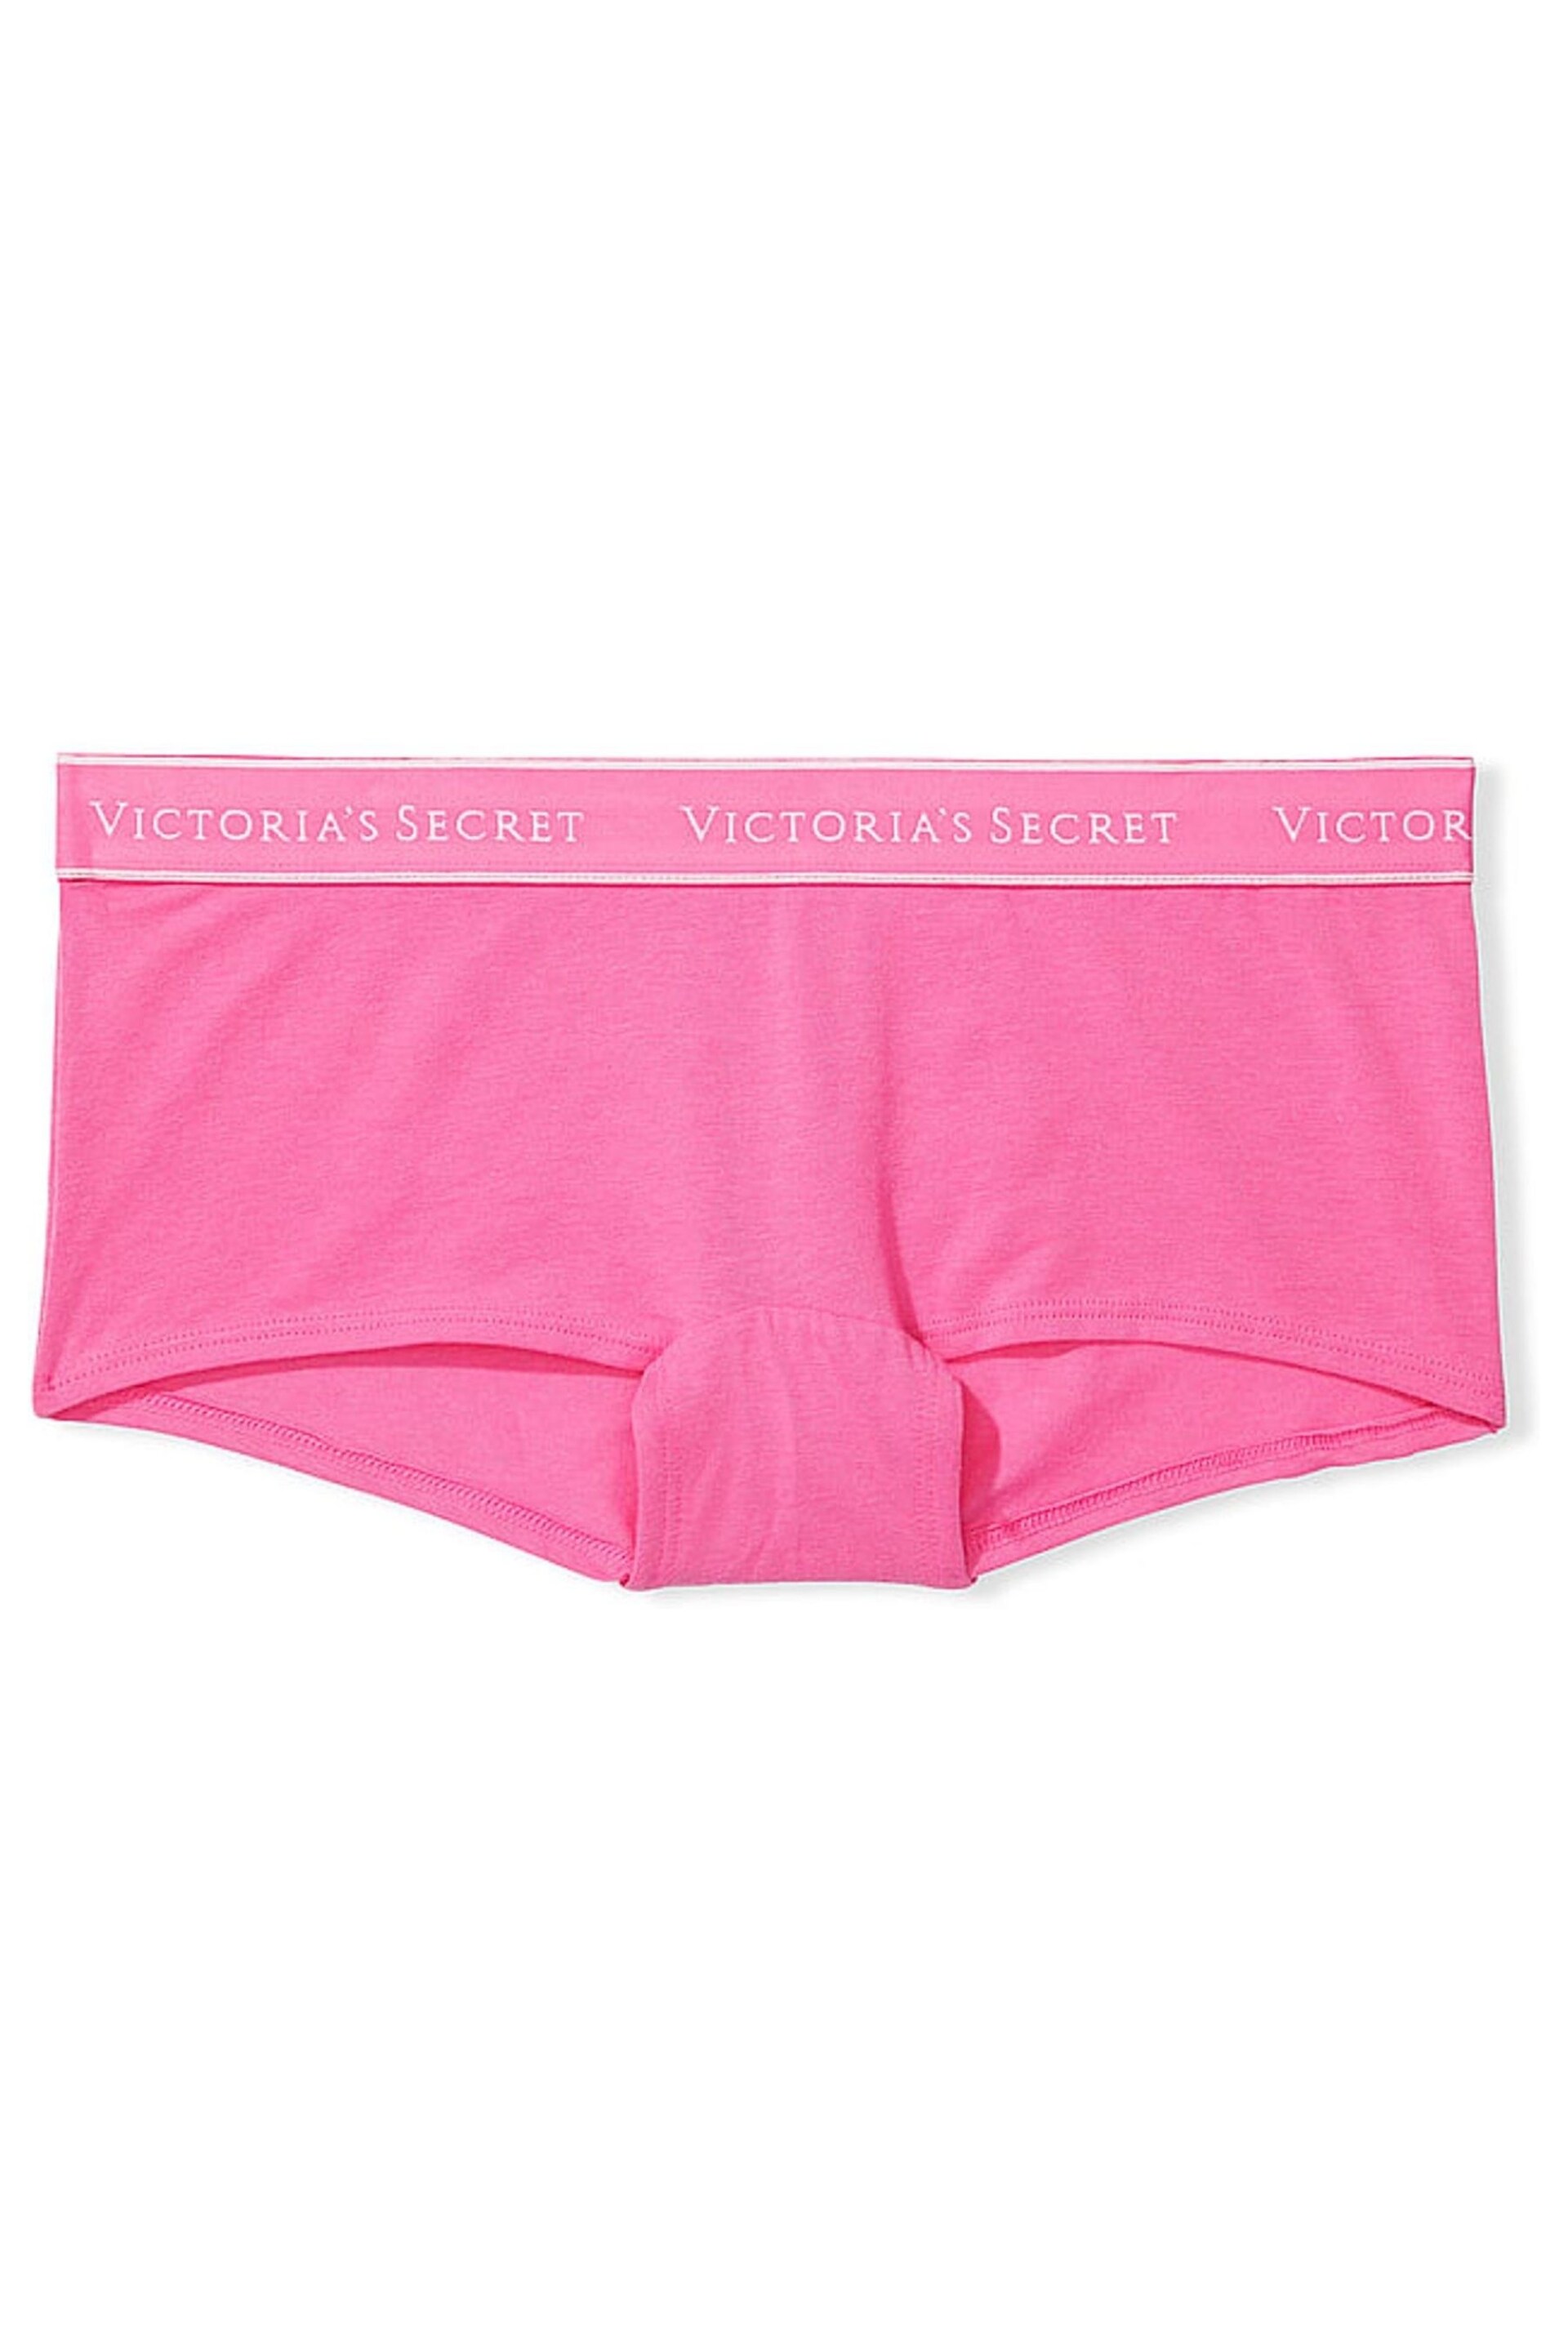 Victoria's Secret Hollywood Pink Short Logo Knickers - Image 3 of 3